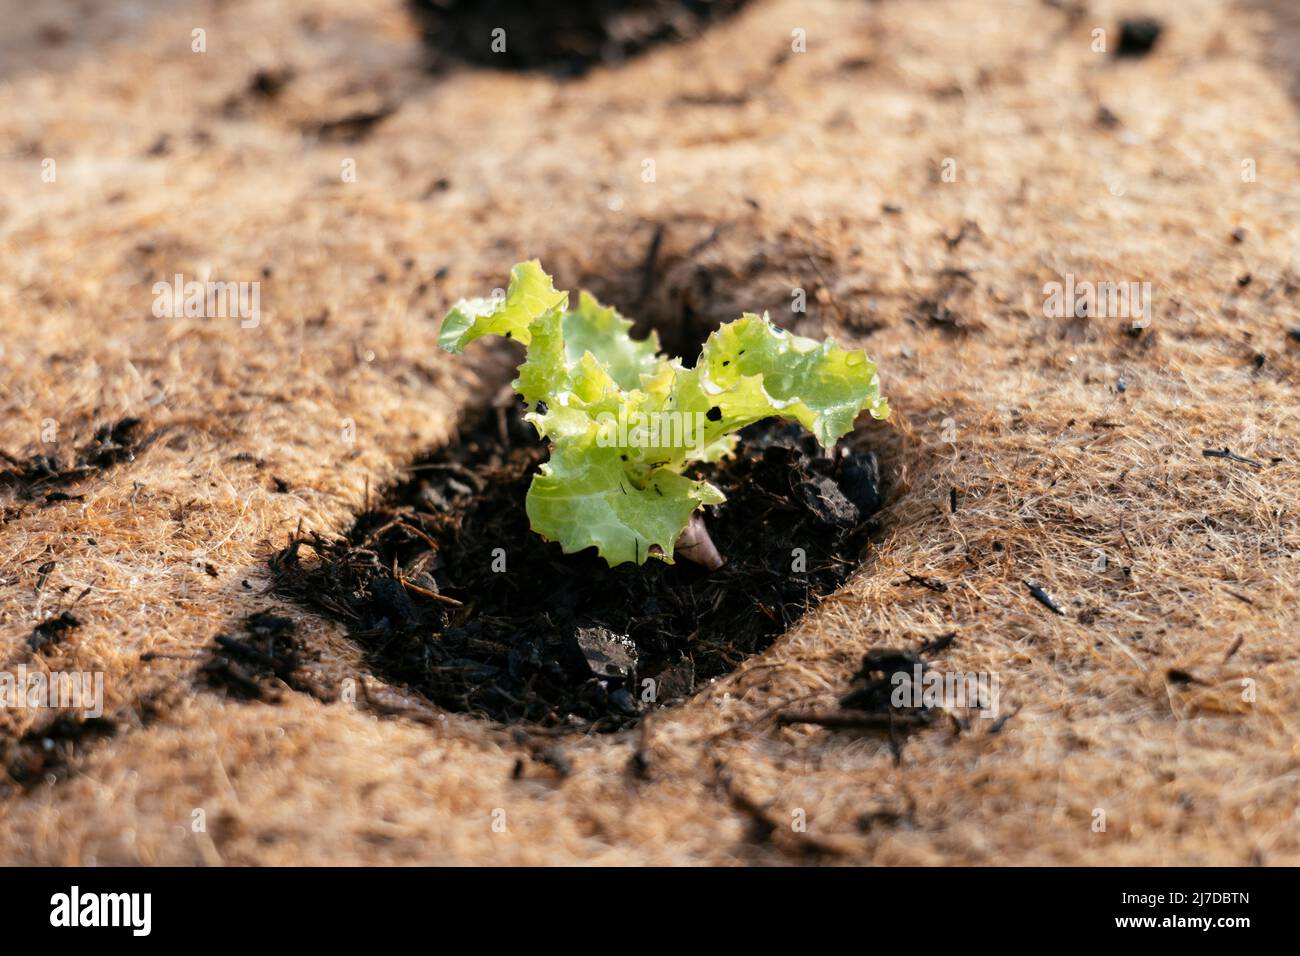 Iceberg lettuce in a raised bed with a jute fleece mat to supress weed growth. Stock Photo